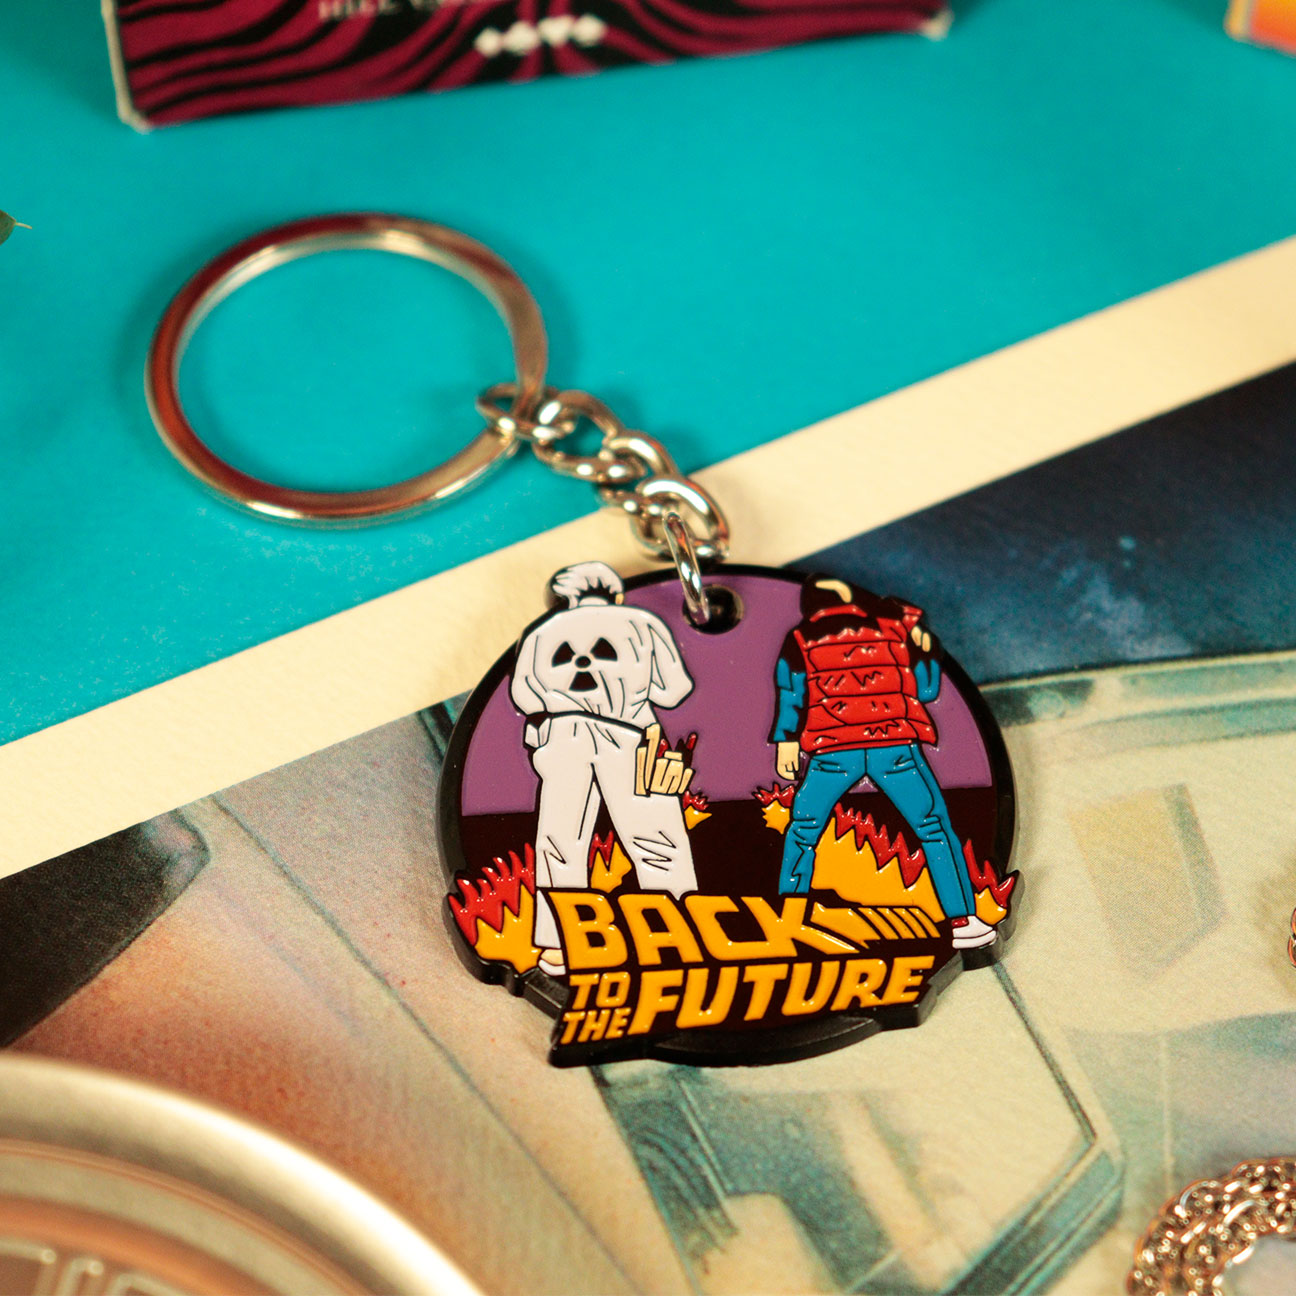 Back to the Future Limited Edition Doc Brown and Marty McFly Enamel Key Ring